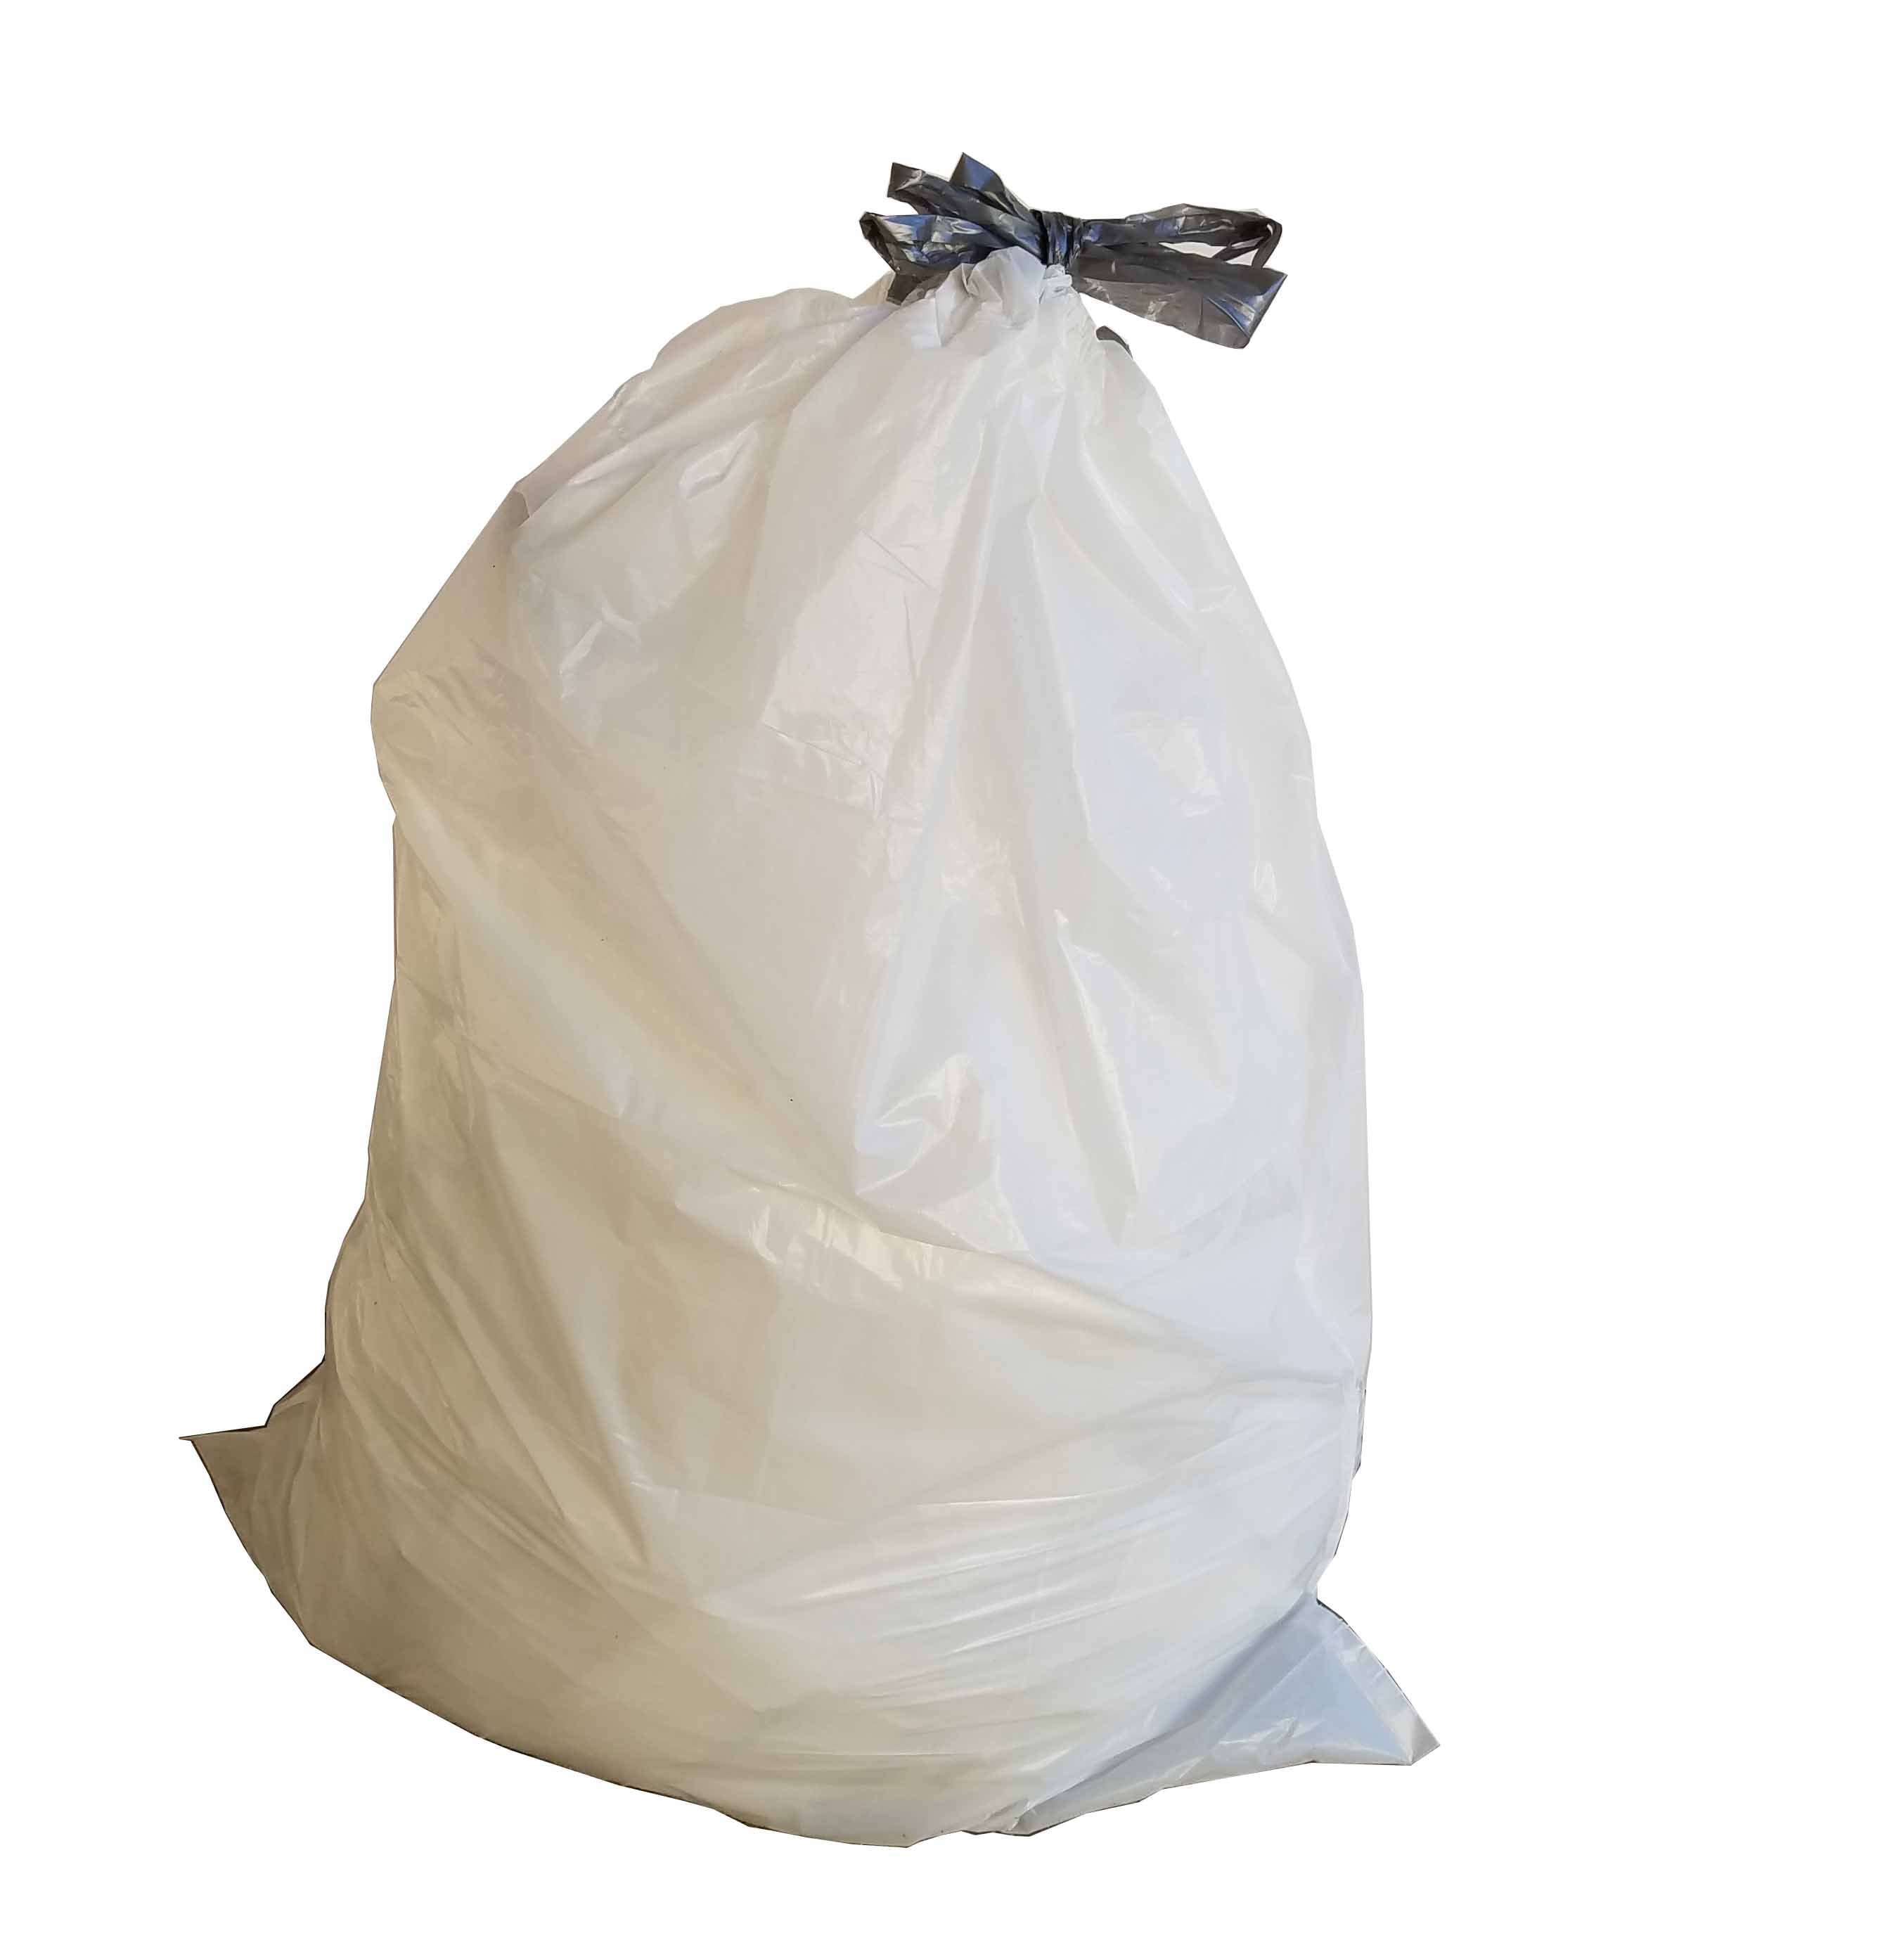 PlasticMill 6-Gallons White Outdoor Plastic Can Trash Bag (50